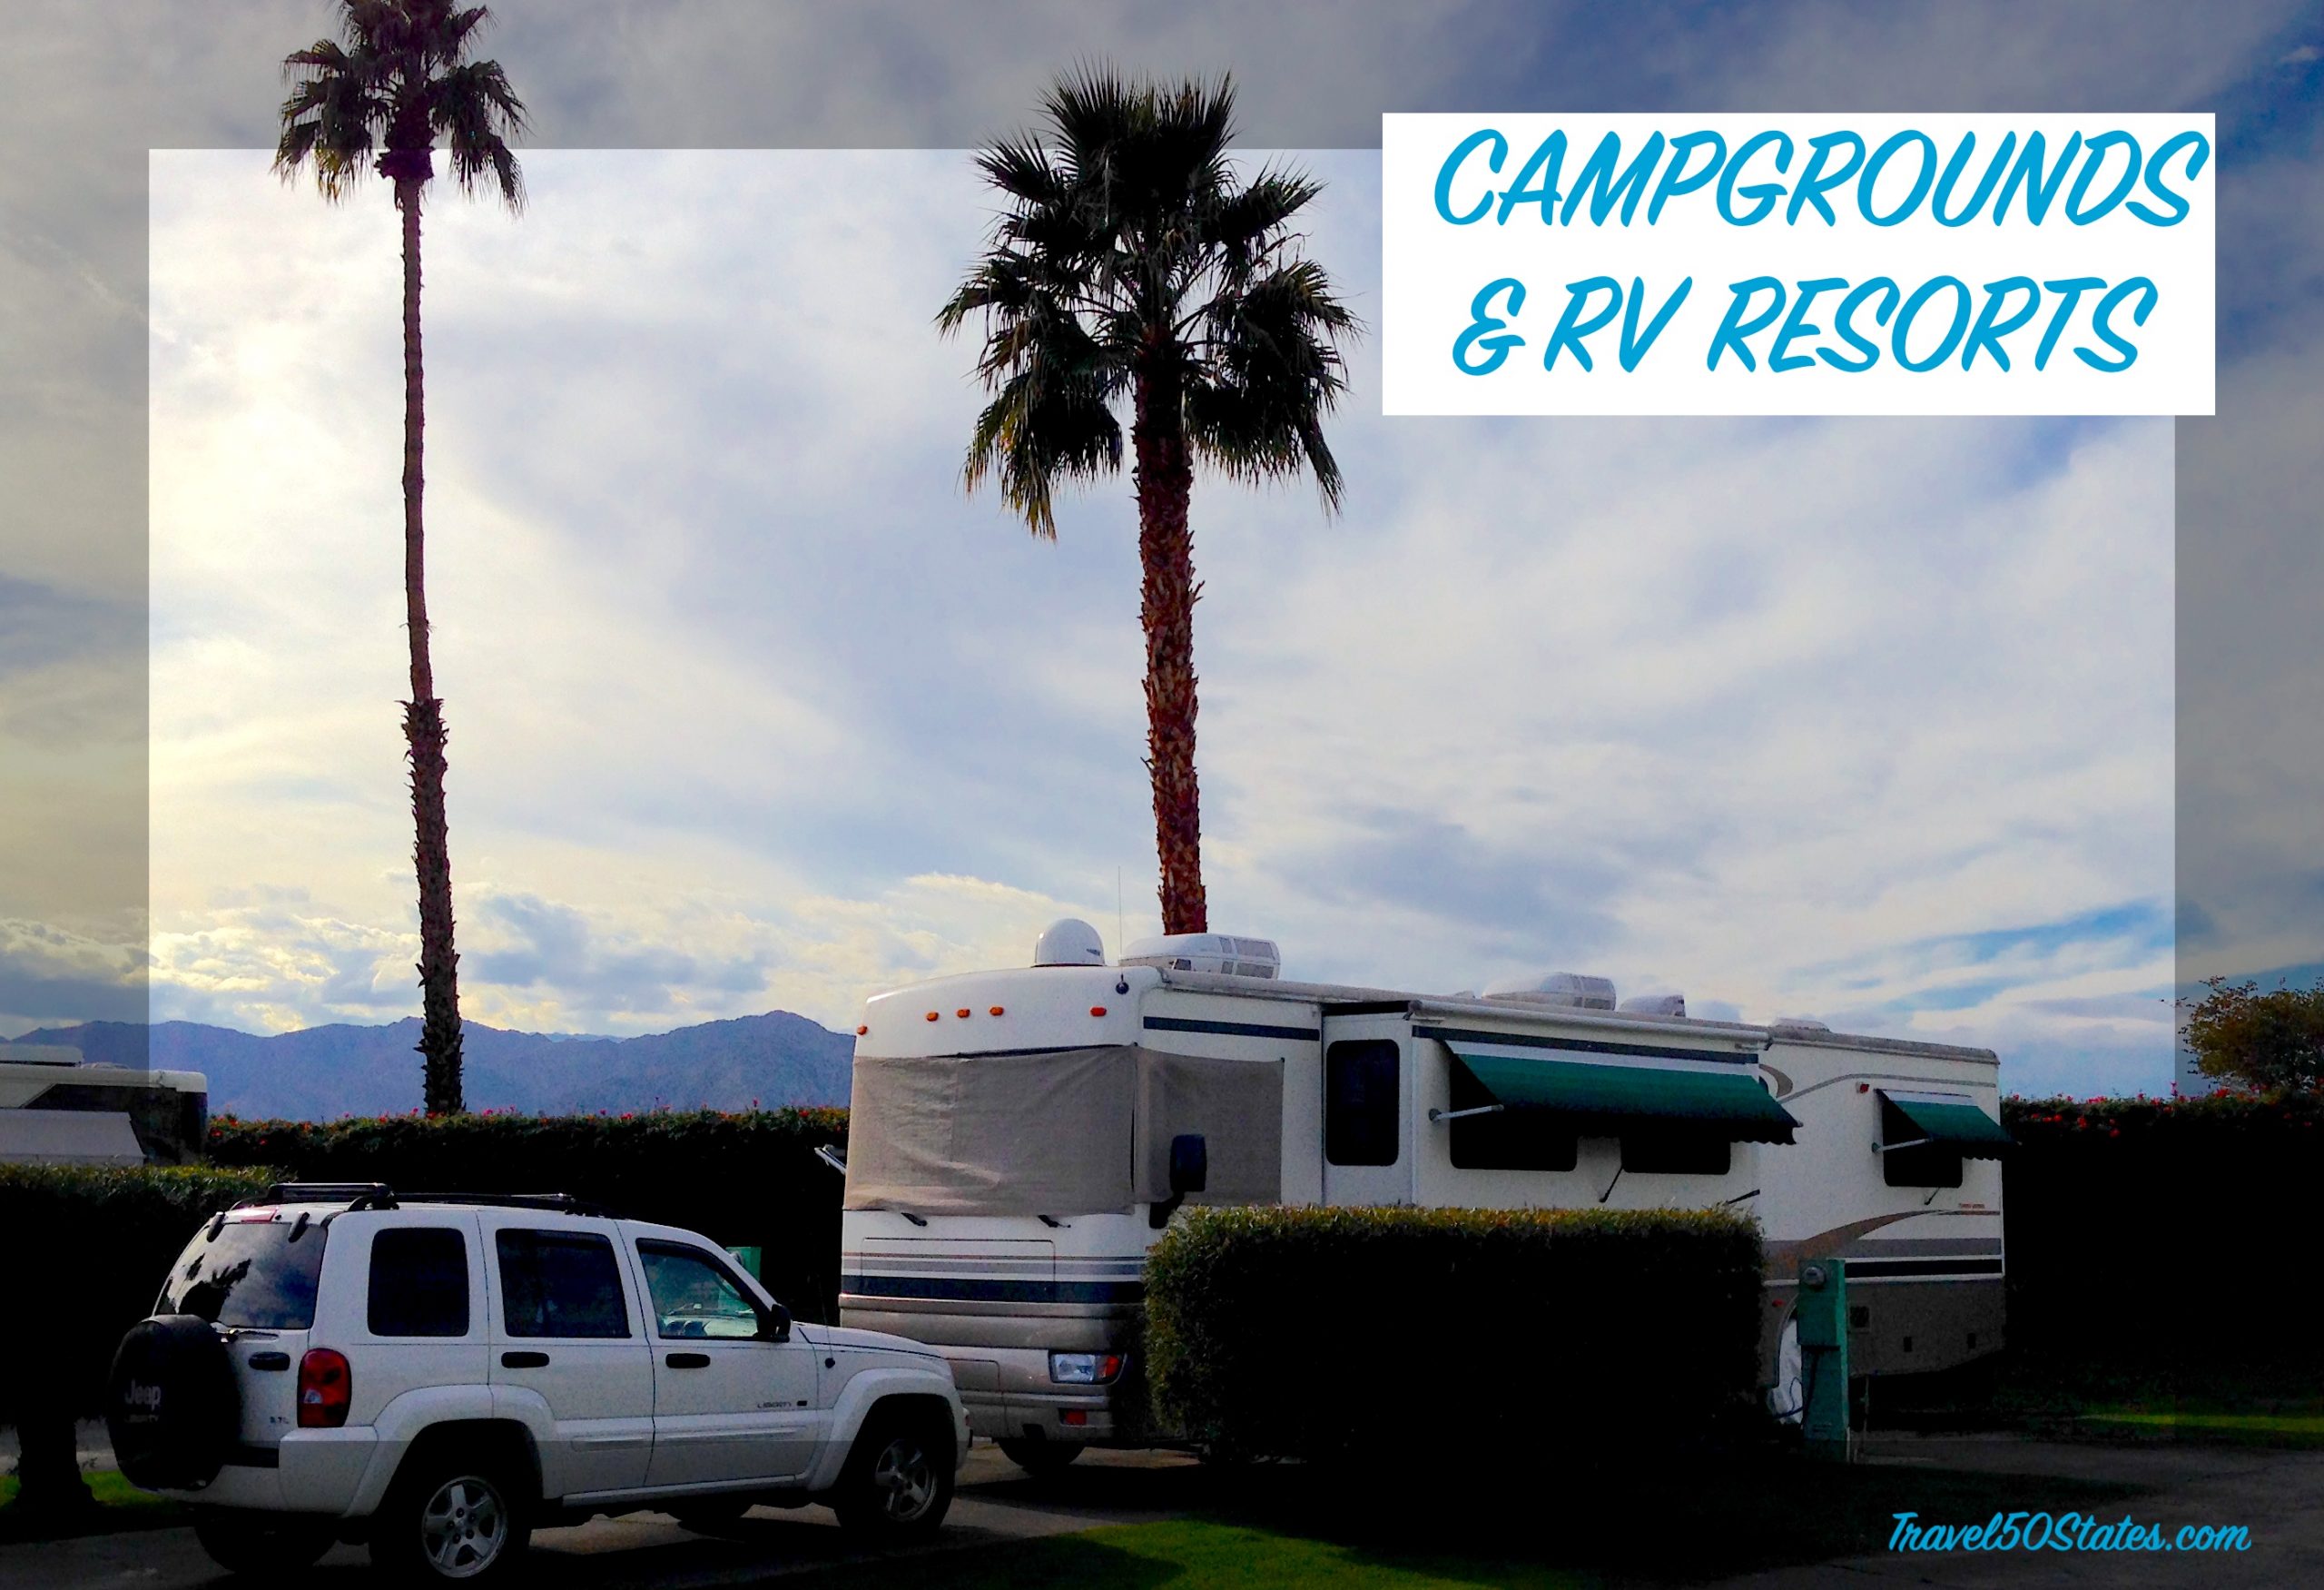 Campgrounds & RV Resorts